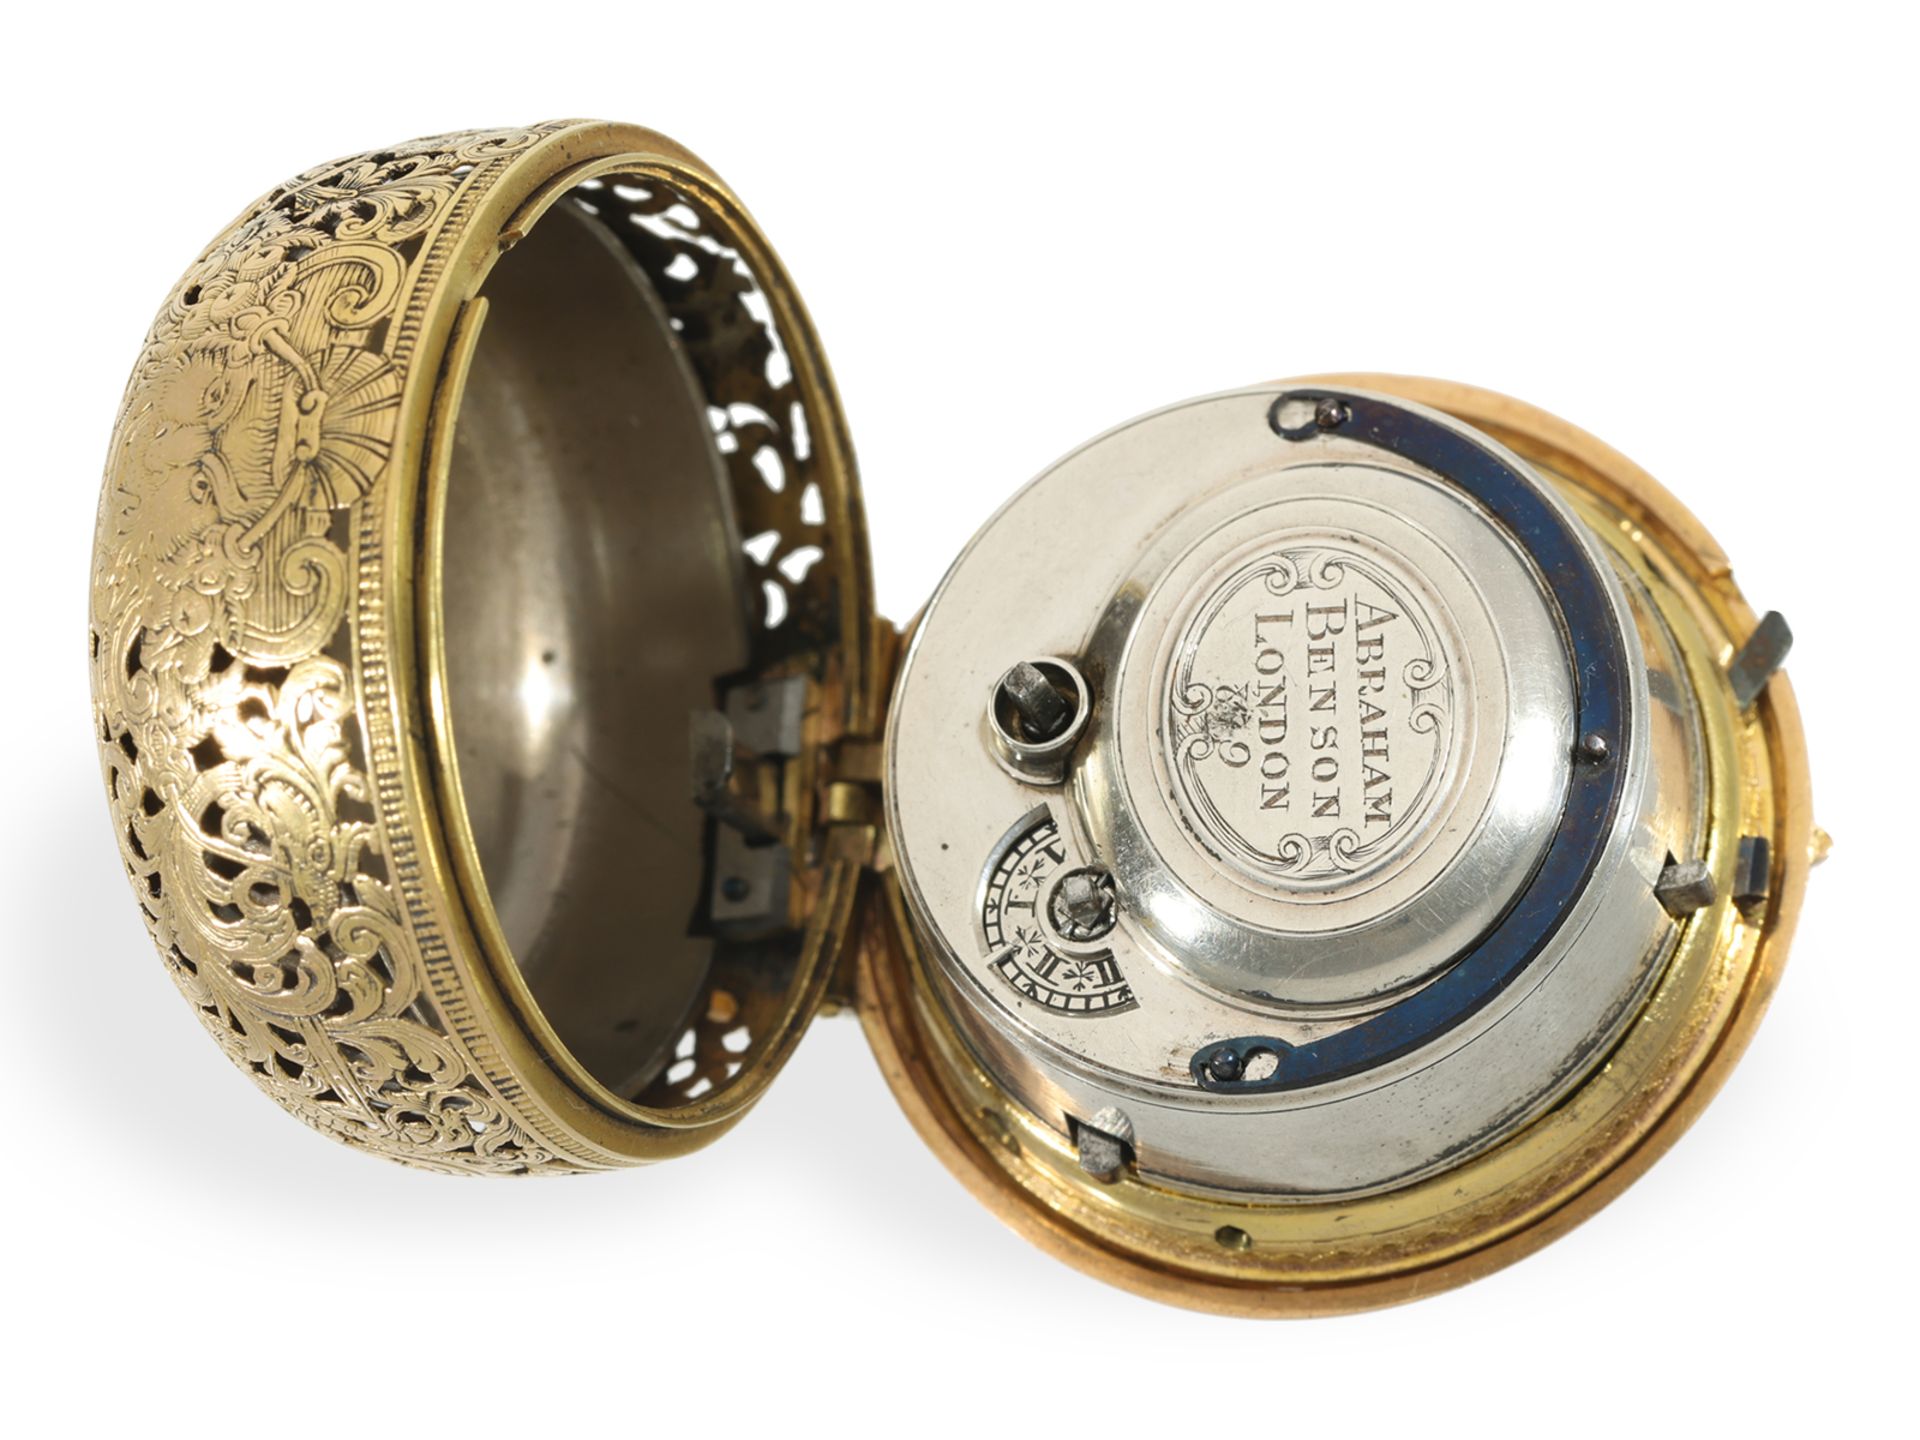 Important, museum-quality gold/enamel repoussé pocket watch with half-quarter repeater, A. Benson Lo - Image 8 of 15